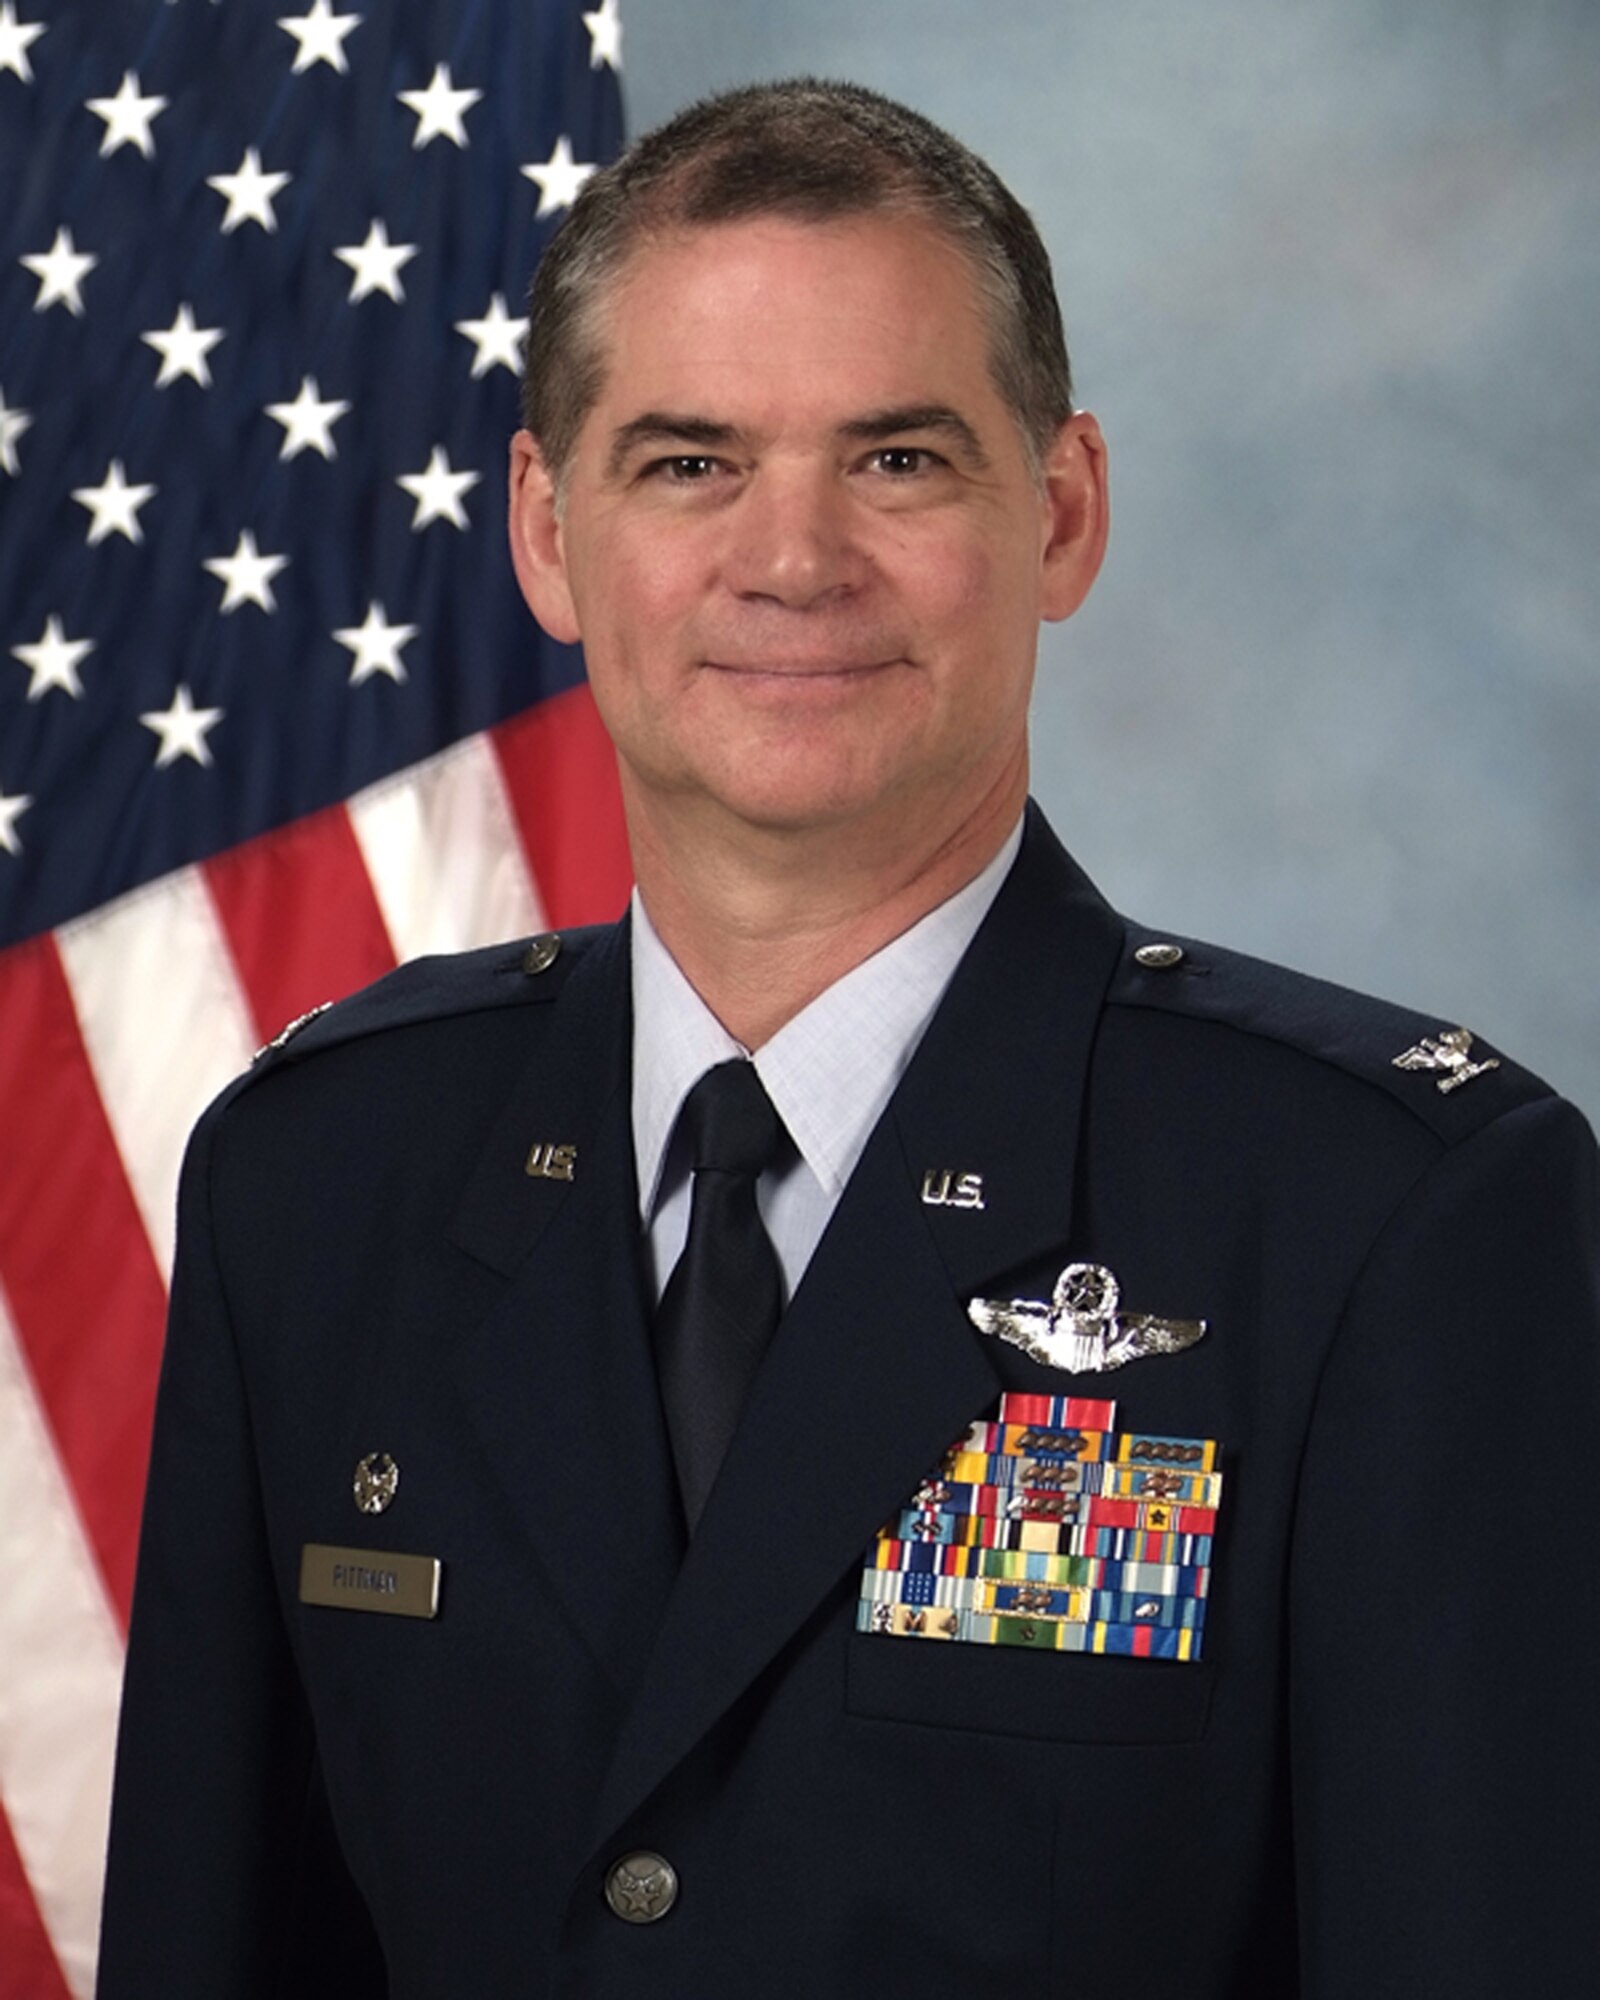 Col. Jay Pittman, Jr., is the commander of the 302nd Airlift Wing, Air Force Reserve. (U.S. Air Force photo)